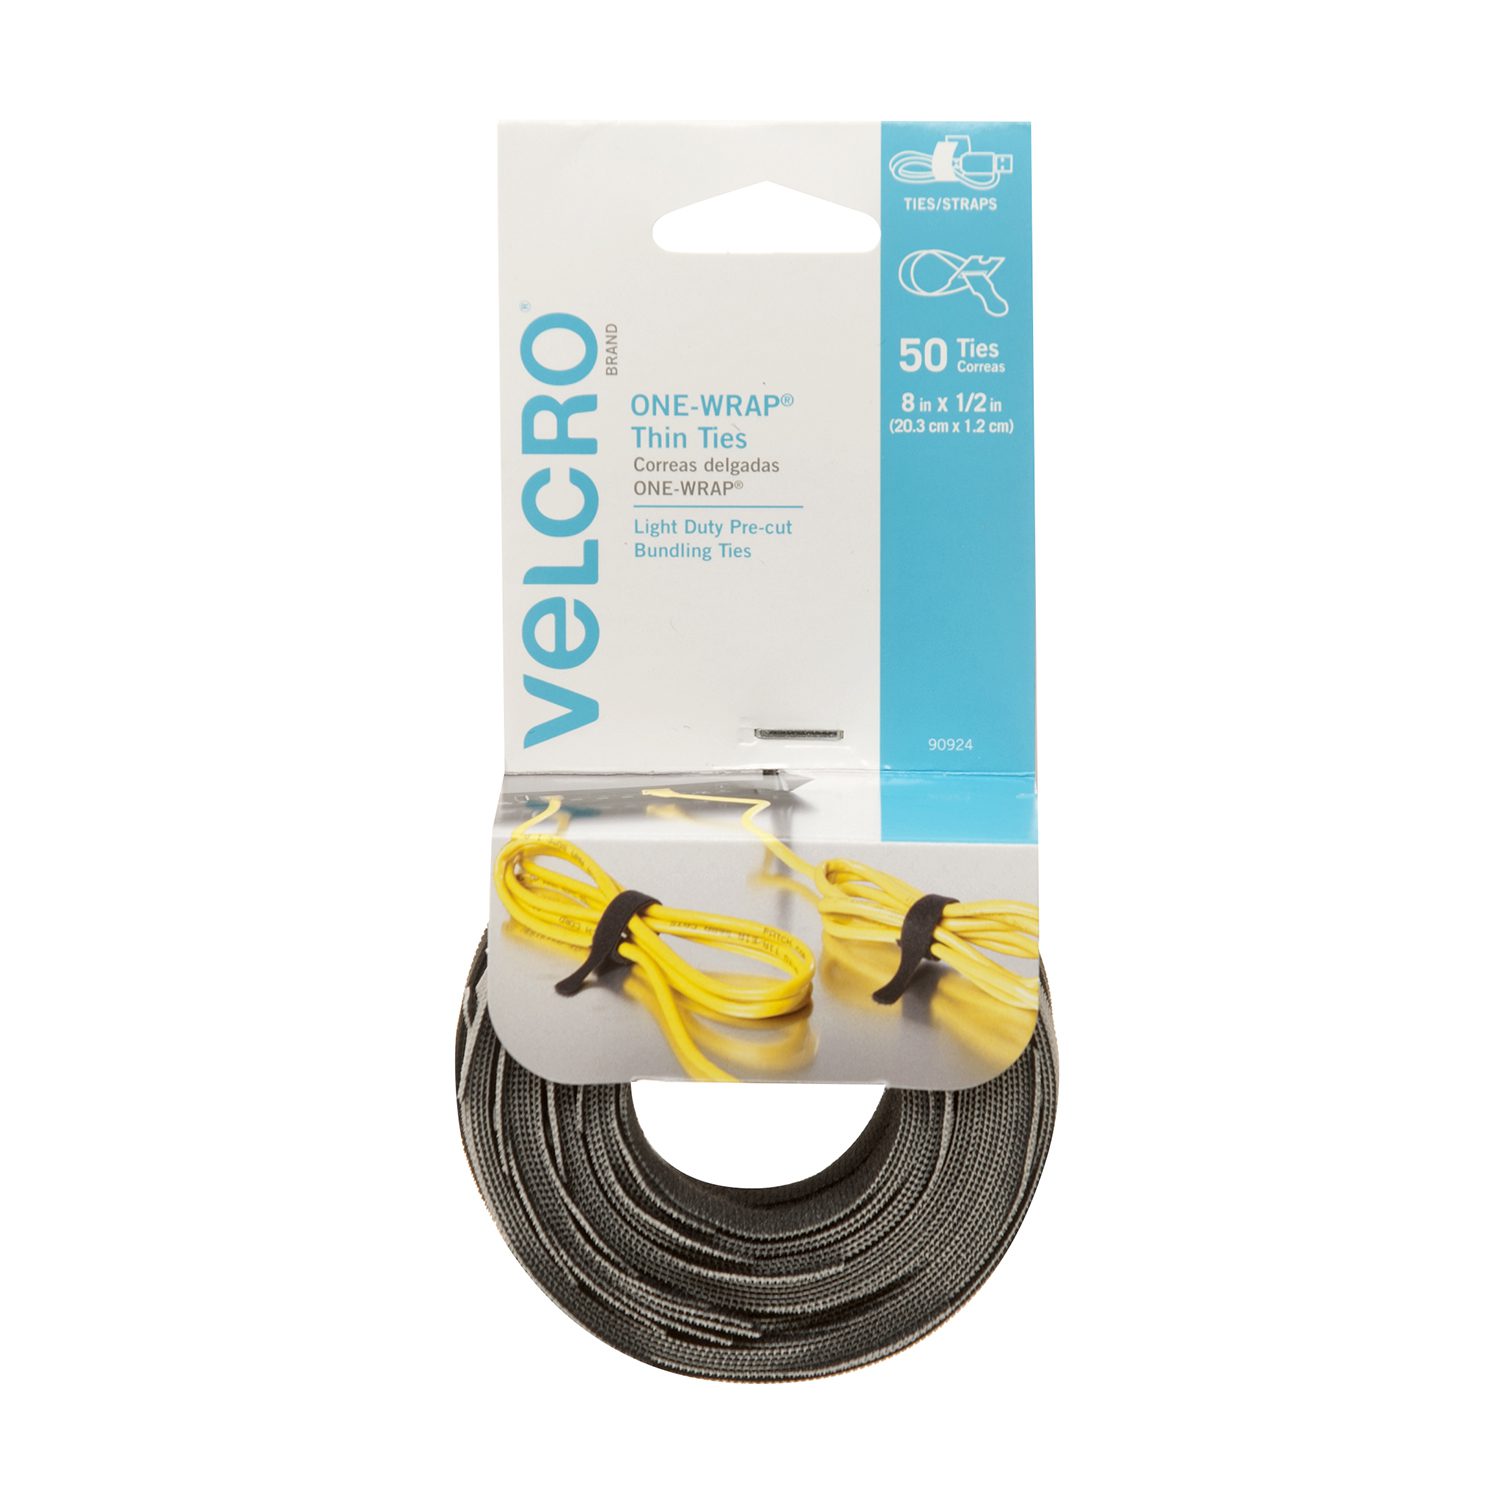 VELCRO Brand Garden Series Elastic Straps | Versatile Ties to Bundle  Stakes, Tool Handles, Wrap Fencing, Camping Gear or Supplies | Adjustable  and